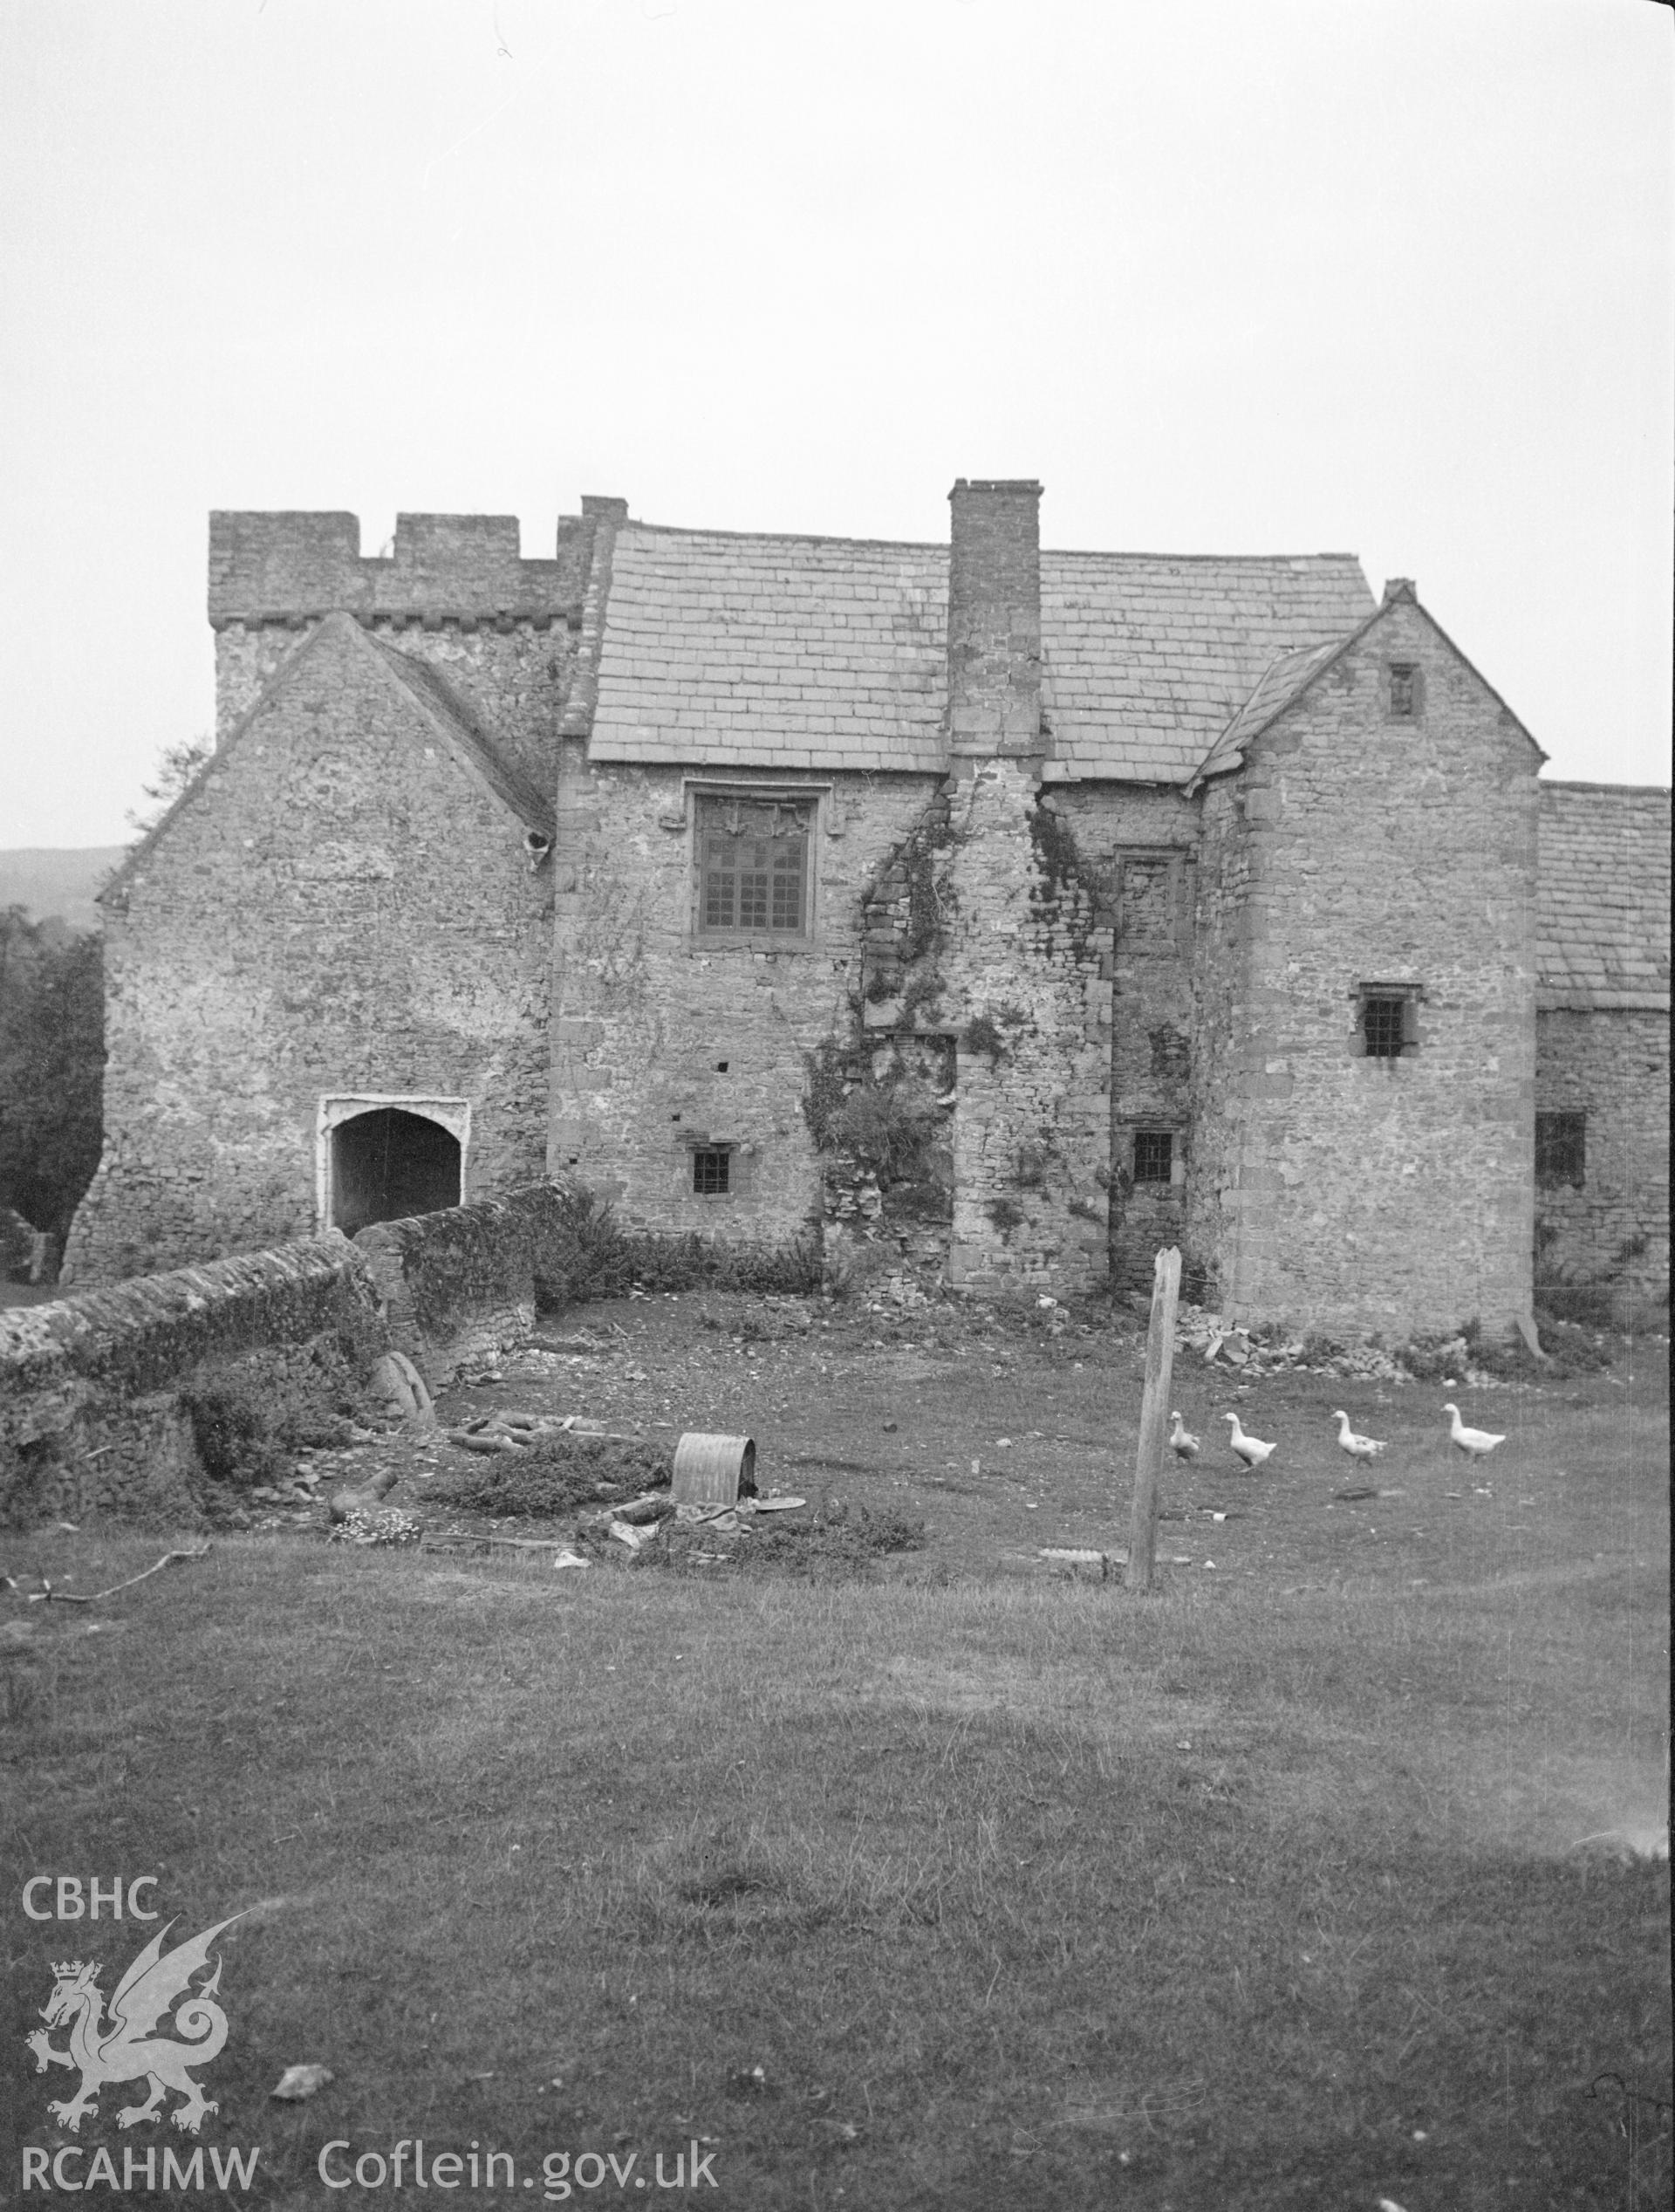 Digital copy of a nitrate negative showing exterior view of Penhow Castle - used as a farmhouse and farm buildings. From the National Building Record Postcard Collection.